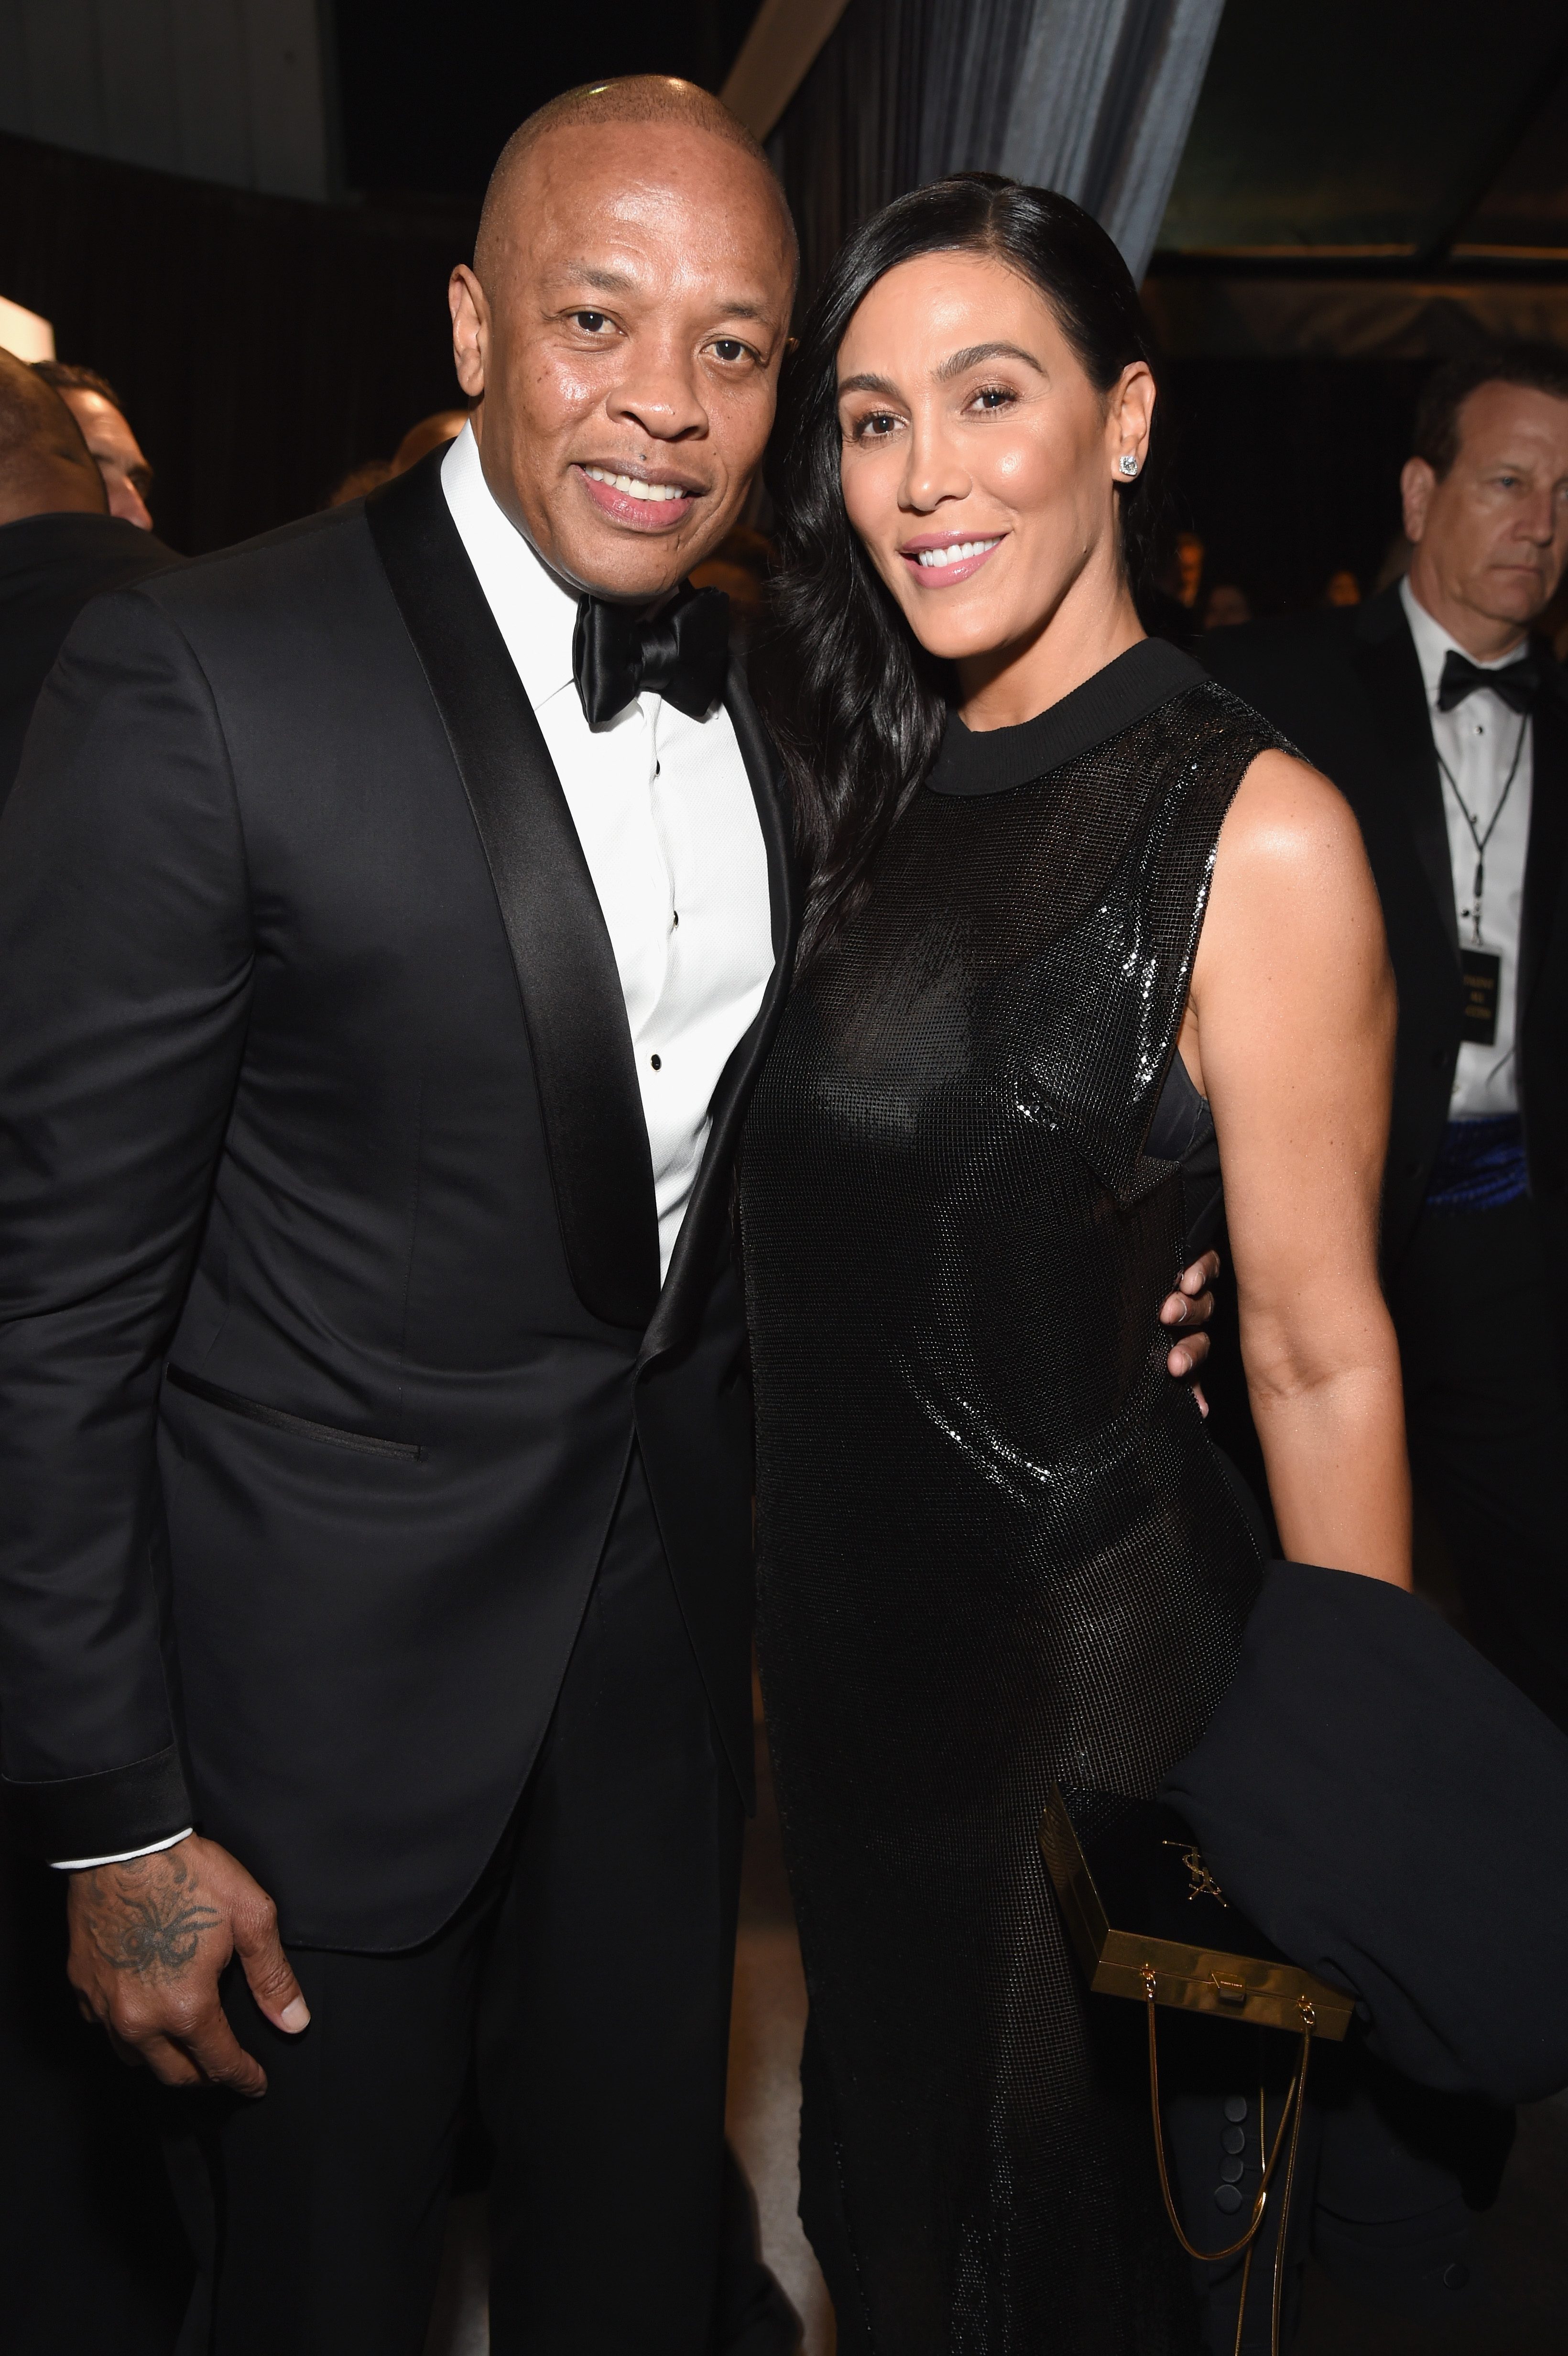 Dr. Dre and Nicole Threatt attend the City of Hope Spirit of Life Gala 2018 at Barker Hangar on October 11, 2018, in Santa Monica, California. | Source: Getty Images